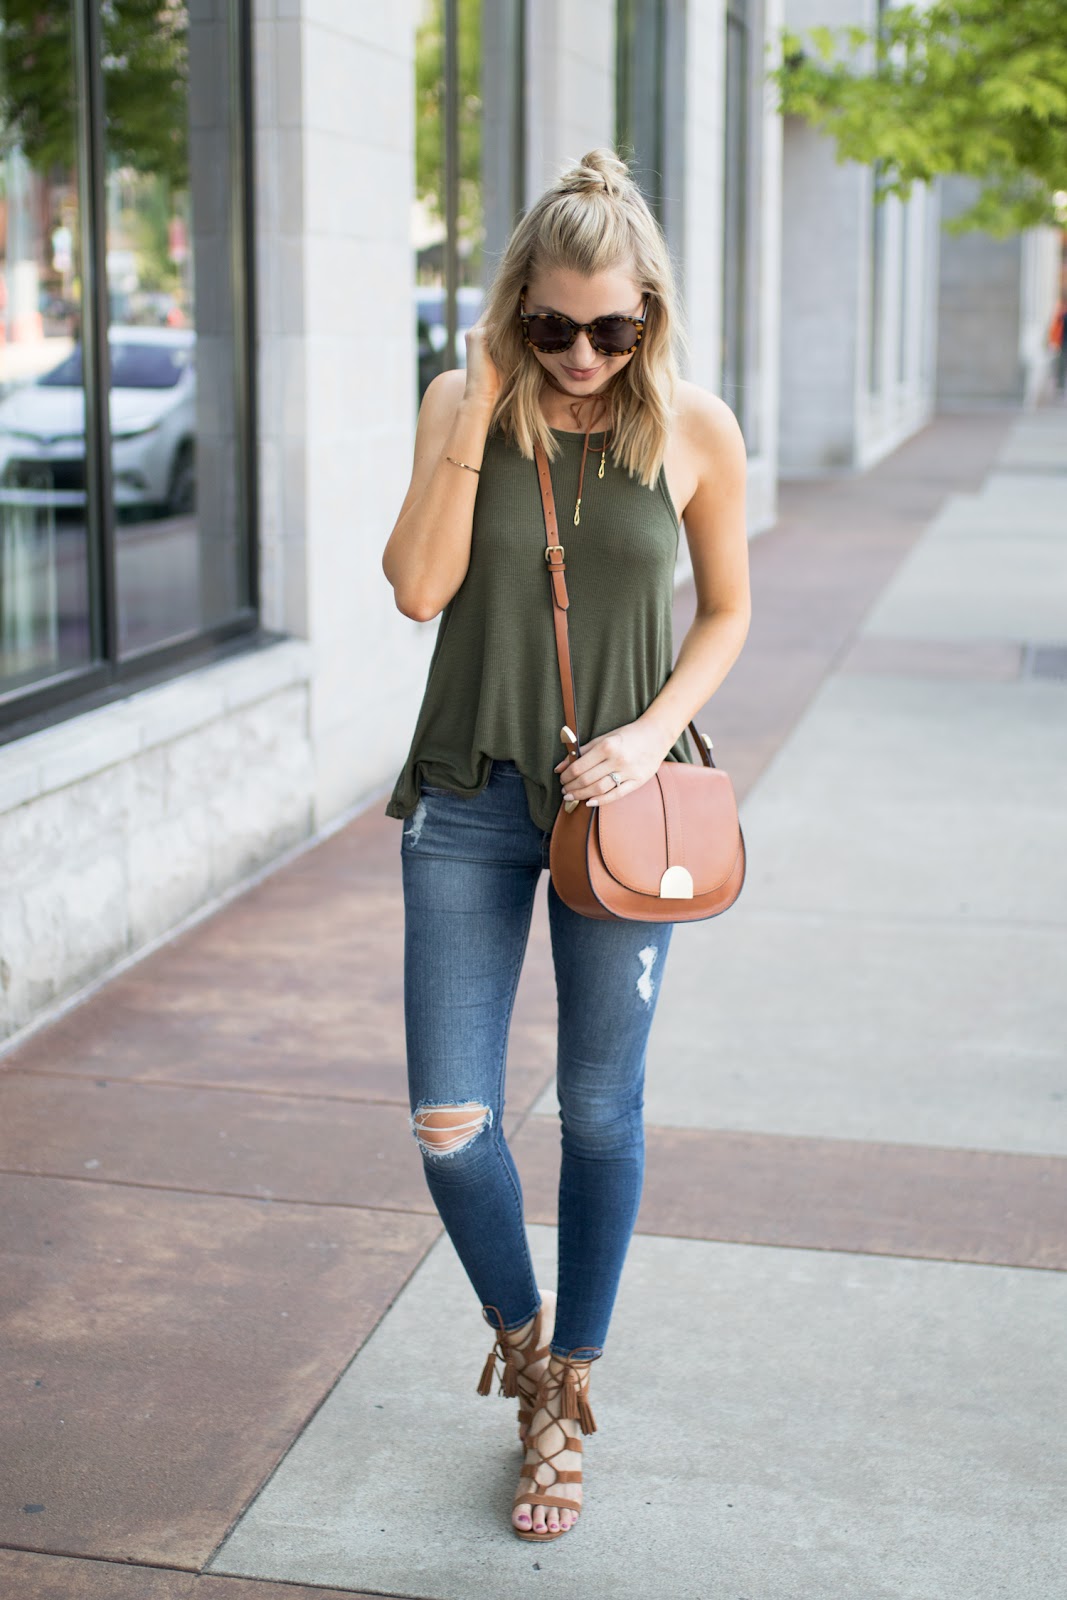 Olive green tank with jeans and brown accessories